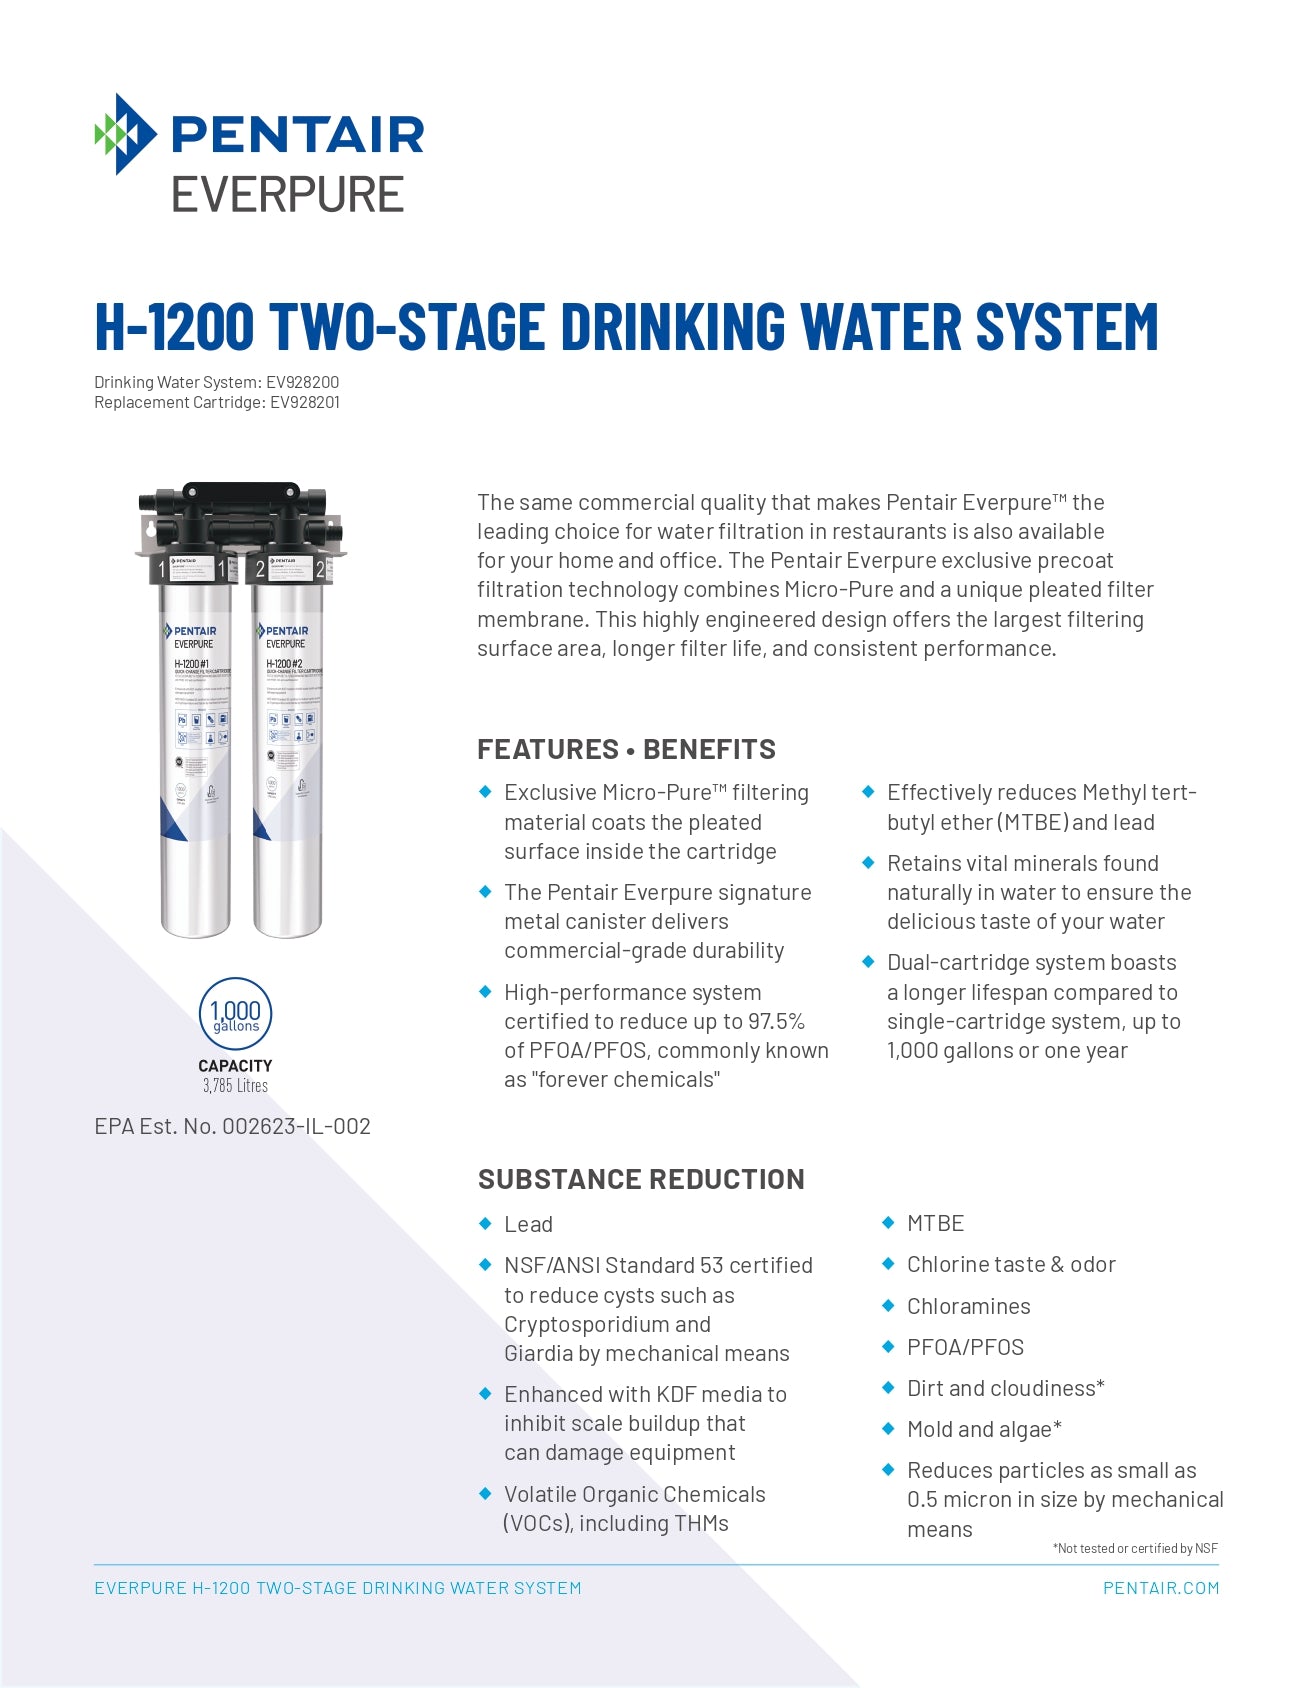 Everpure H-1200 淨濾芯(連上門換芯服務 Filter Cartridge with on-site installation)